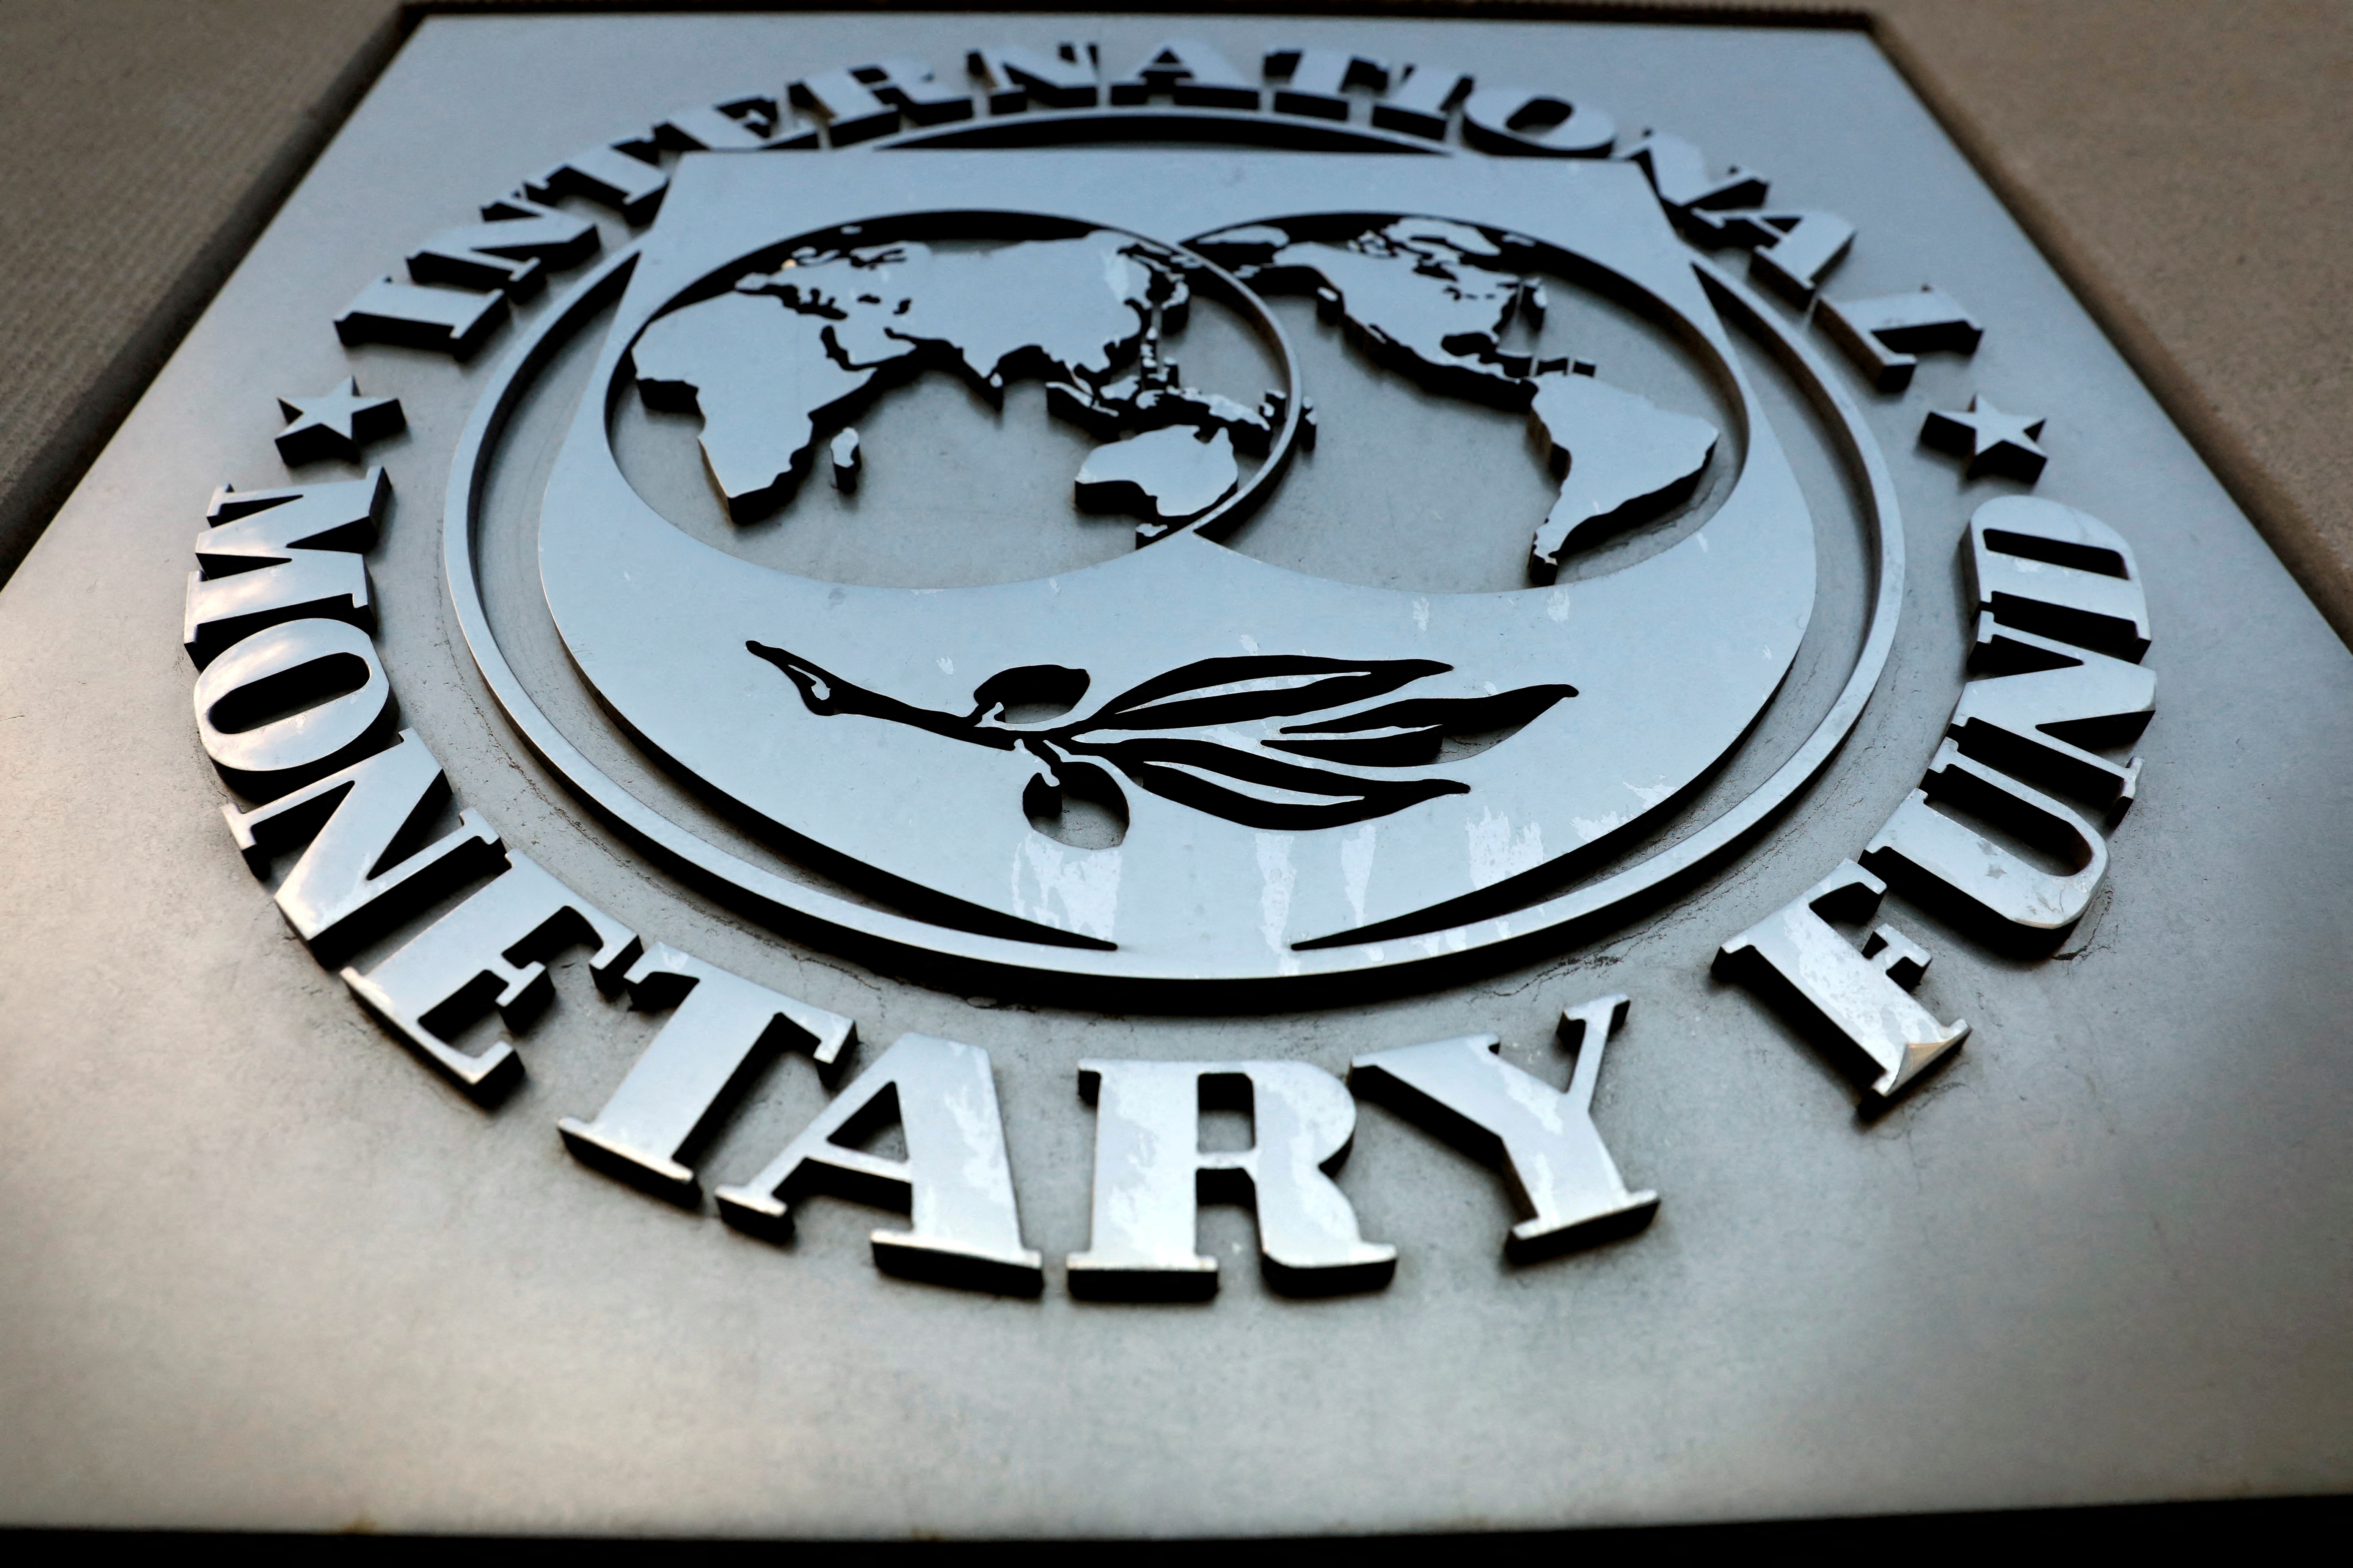 A spokesman for the International Monetary Fund stated on Friday that not raising the US debt ceiling would have serious repercussions (REUTERS/Yuri Gripas/File Photo)